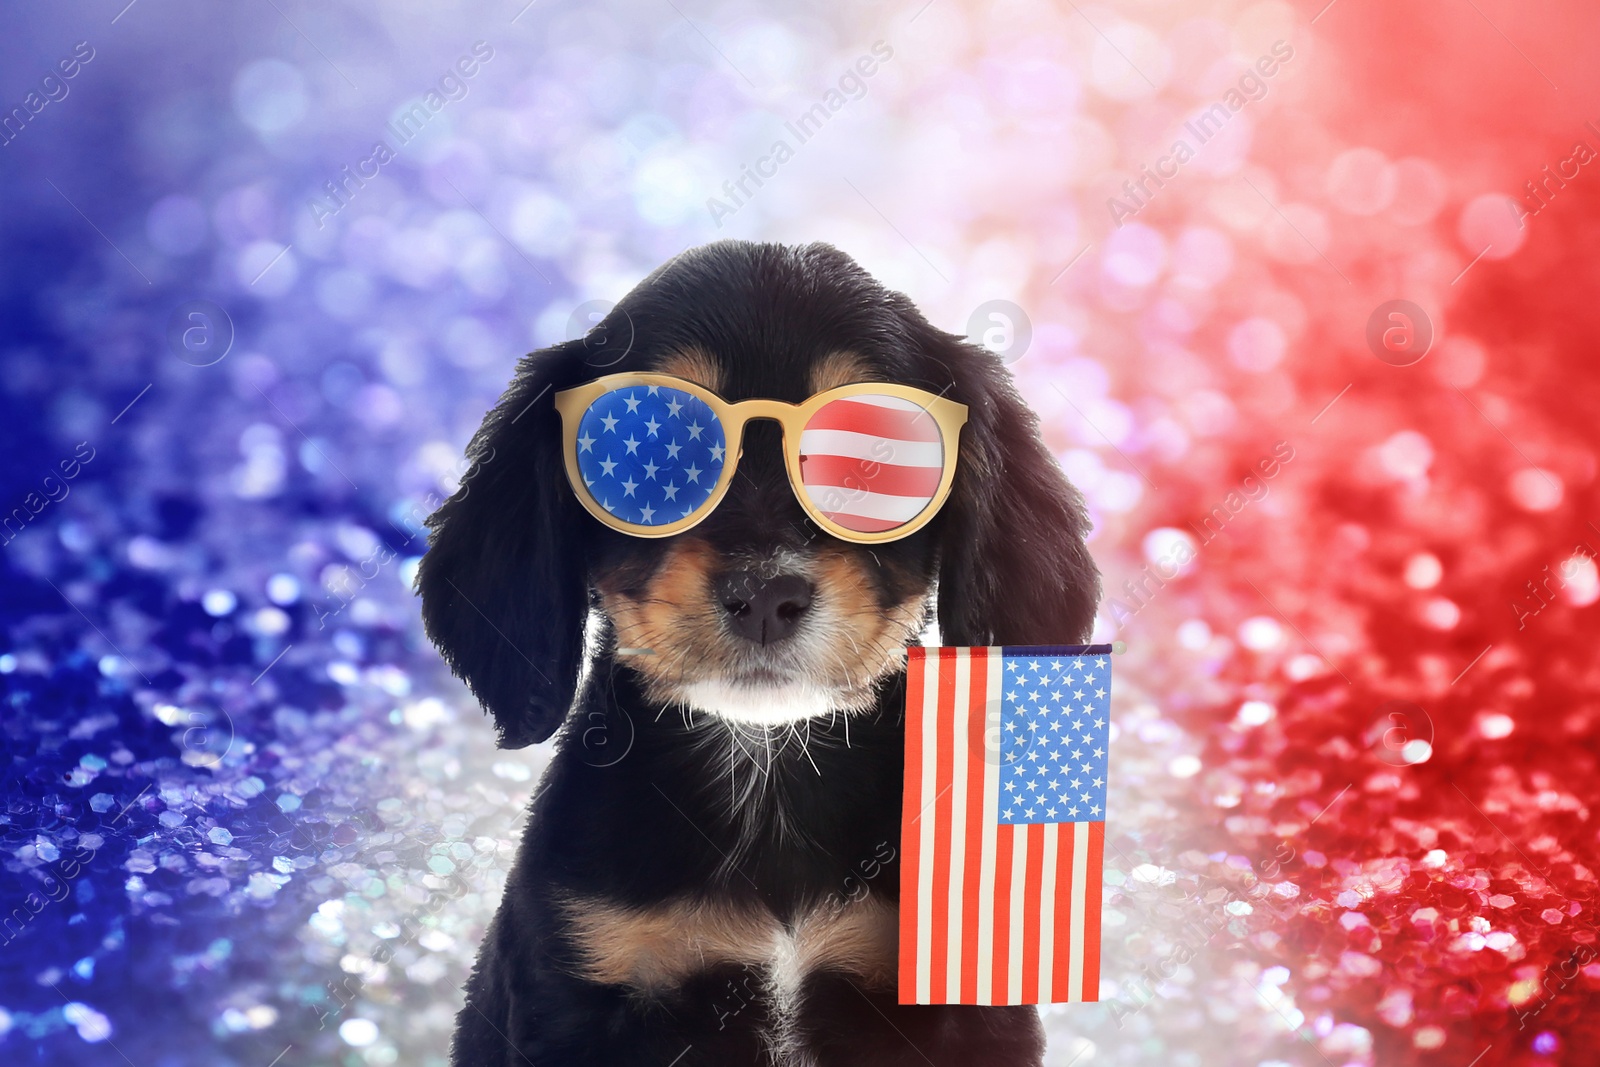 Image of 4th of July - Independence Day of USA. Cute dog with sunglasses and American flag on shiny festive background